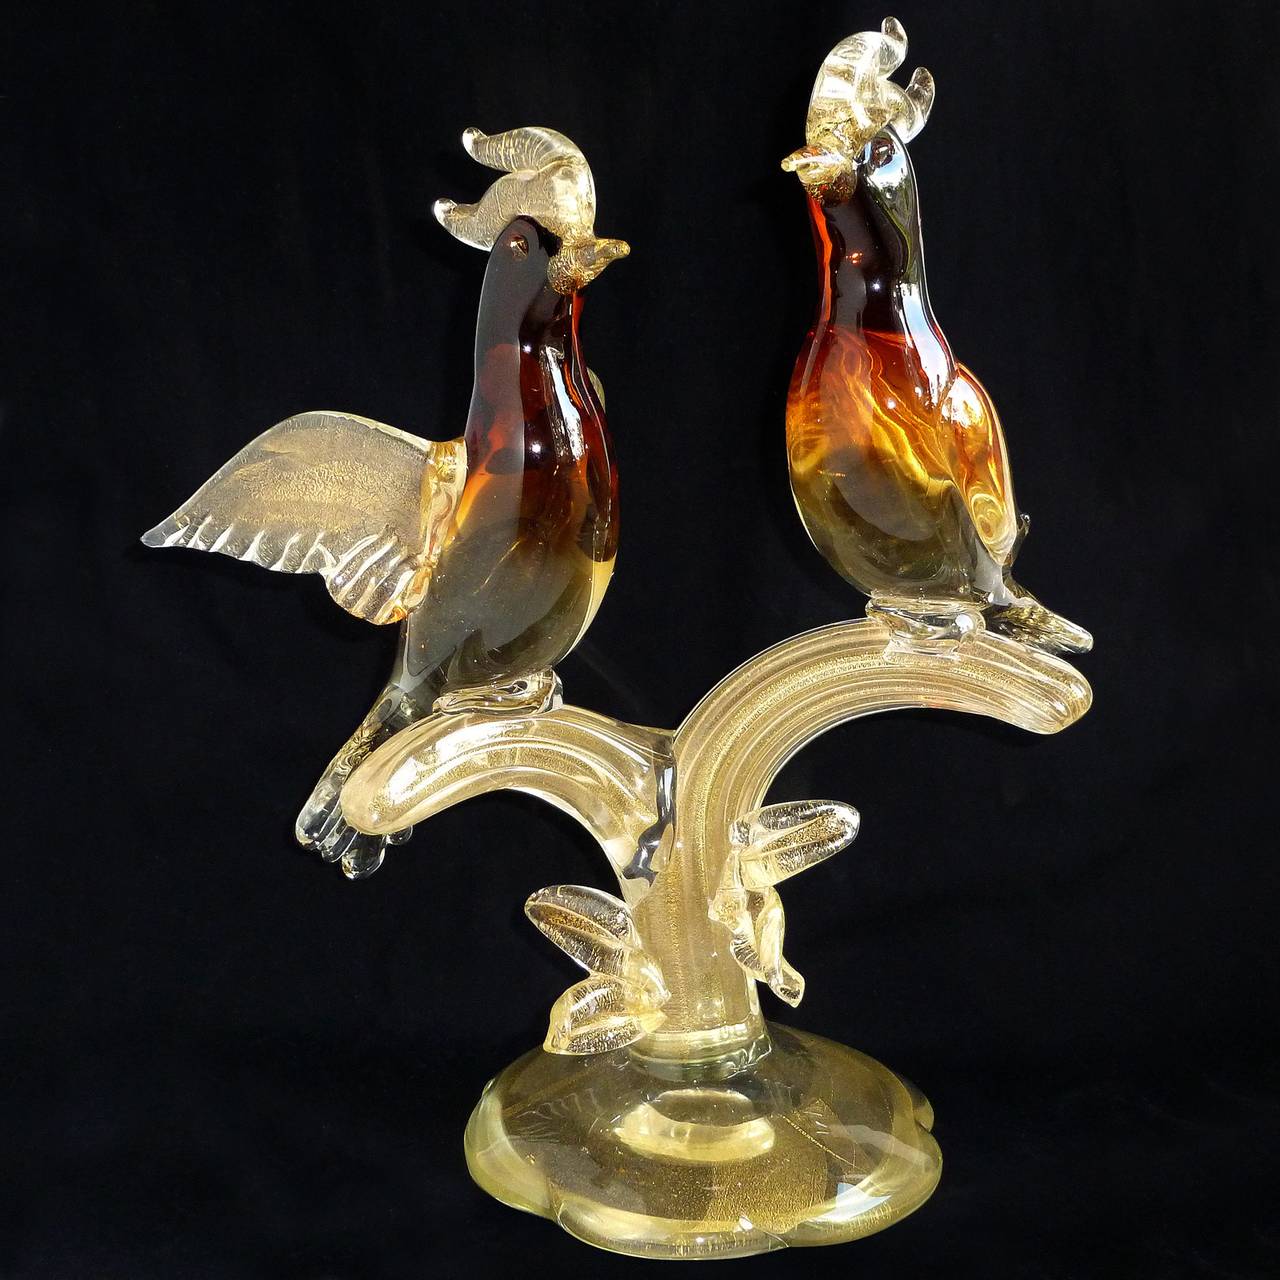 Beautiful, large vintage Murano hand blown Sommerso orange amber and gold flecks Italian art glass courting birds centrepiece sculpture. Attributed to the Salviati company. The deep amber color fades down the birds body until it becomes clear. The